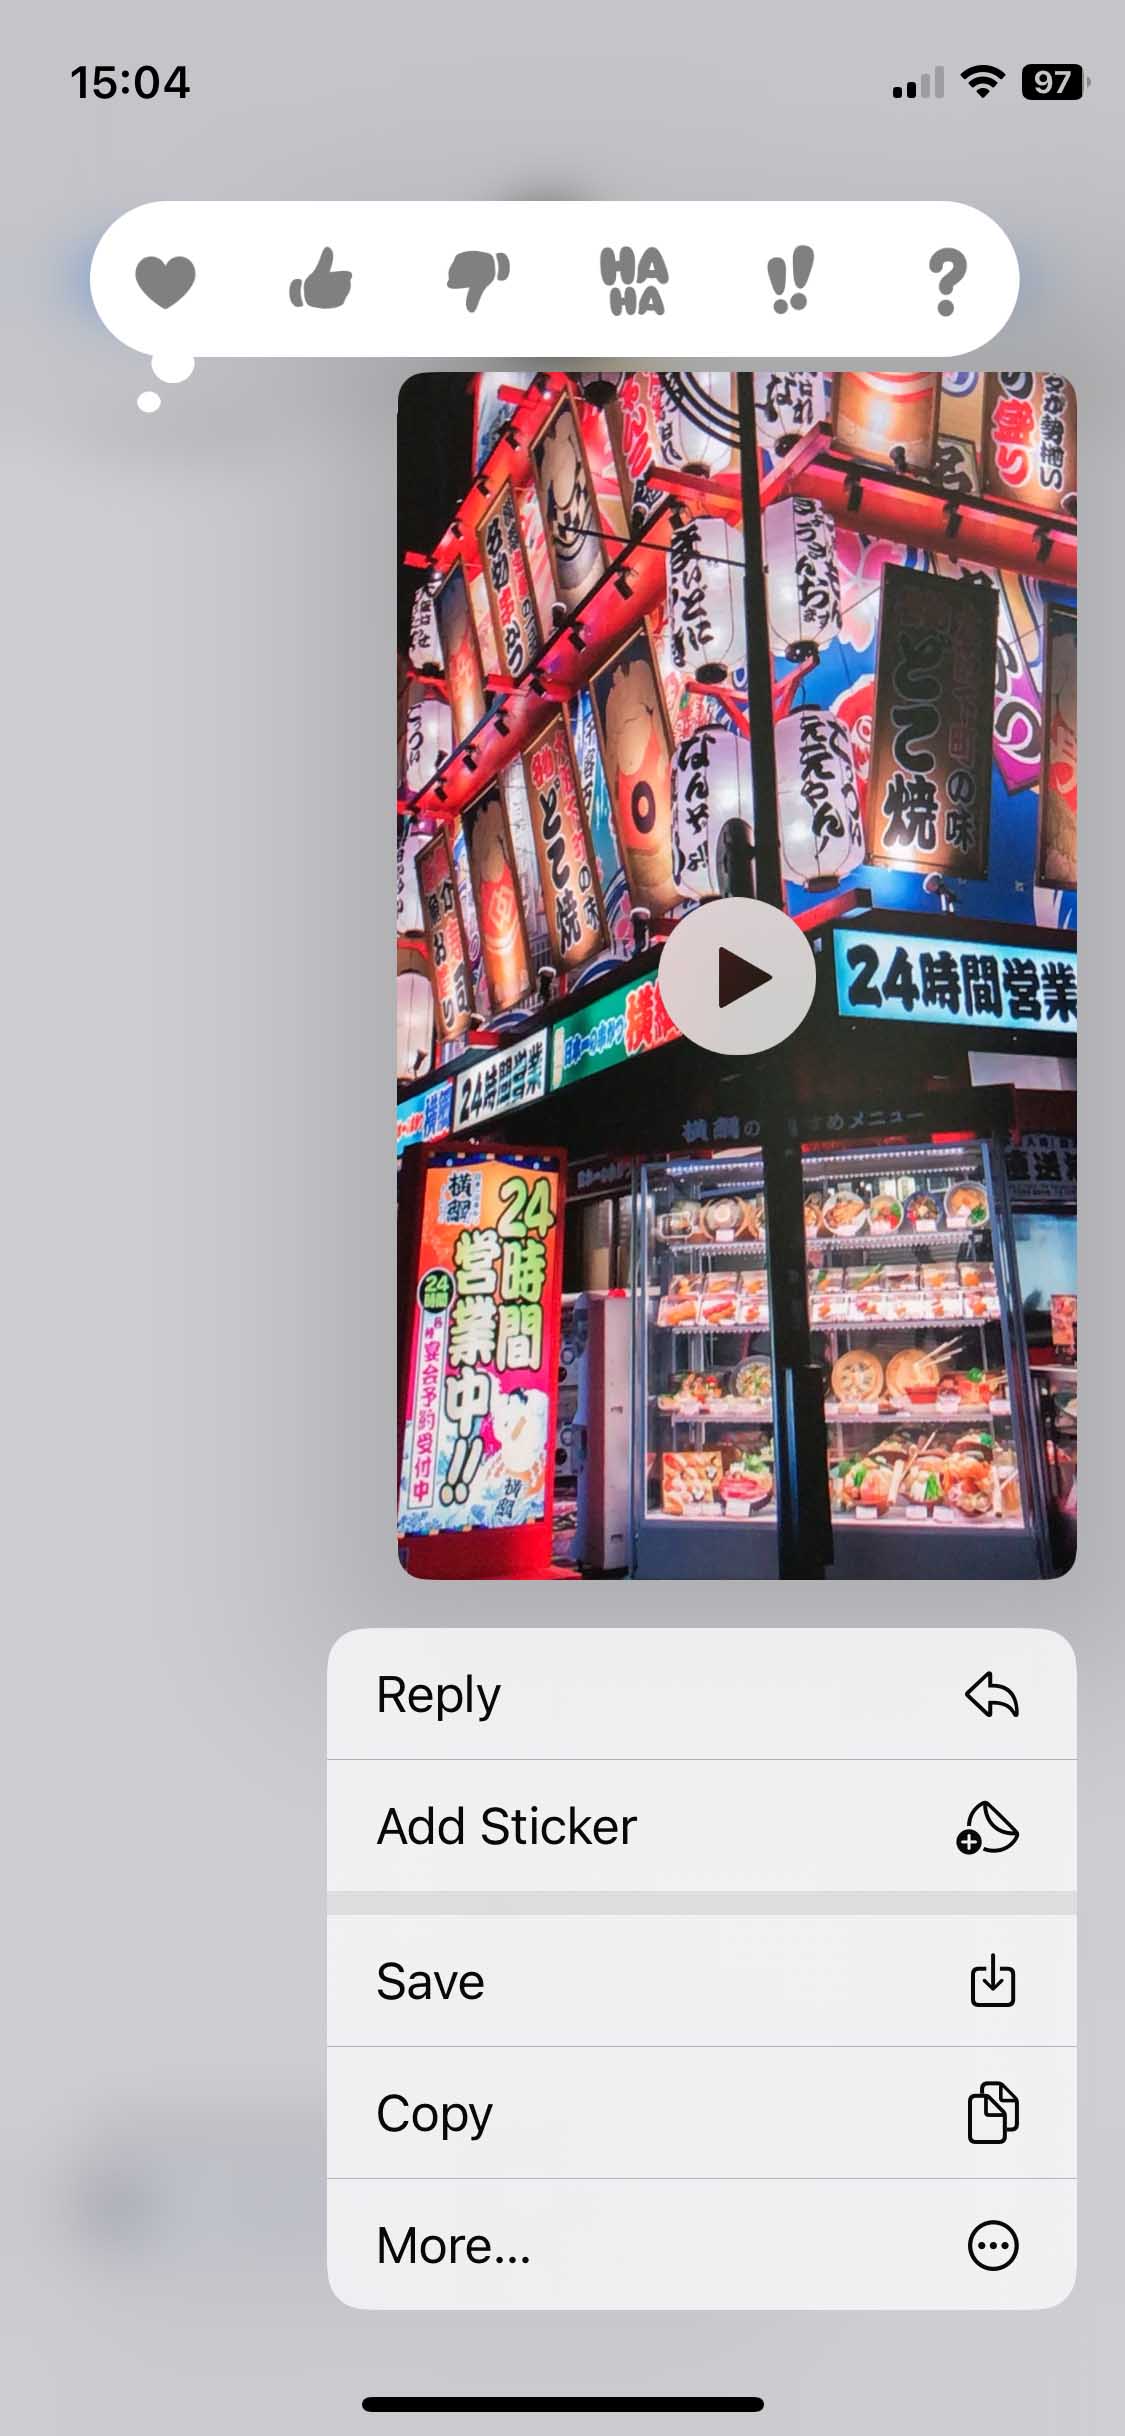 Save video from attachments in Messages